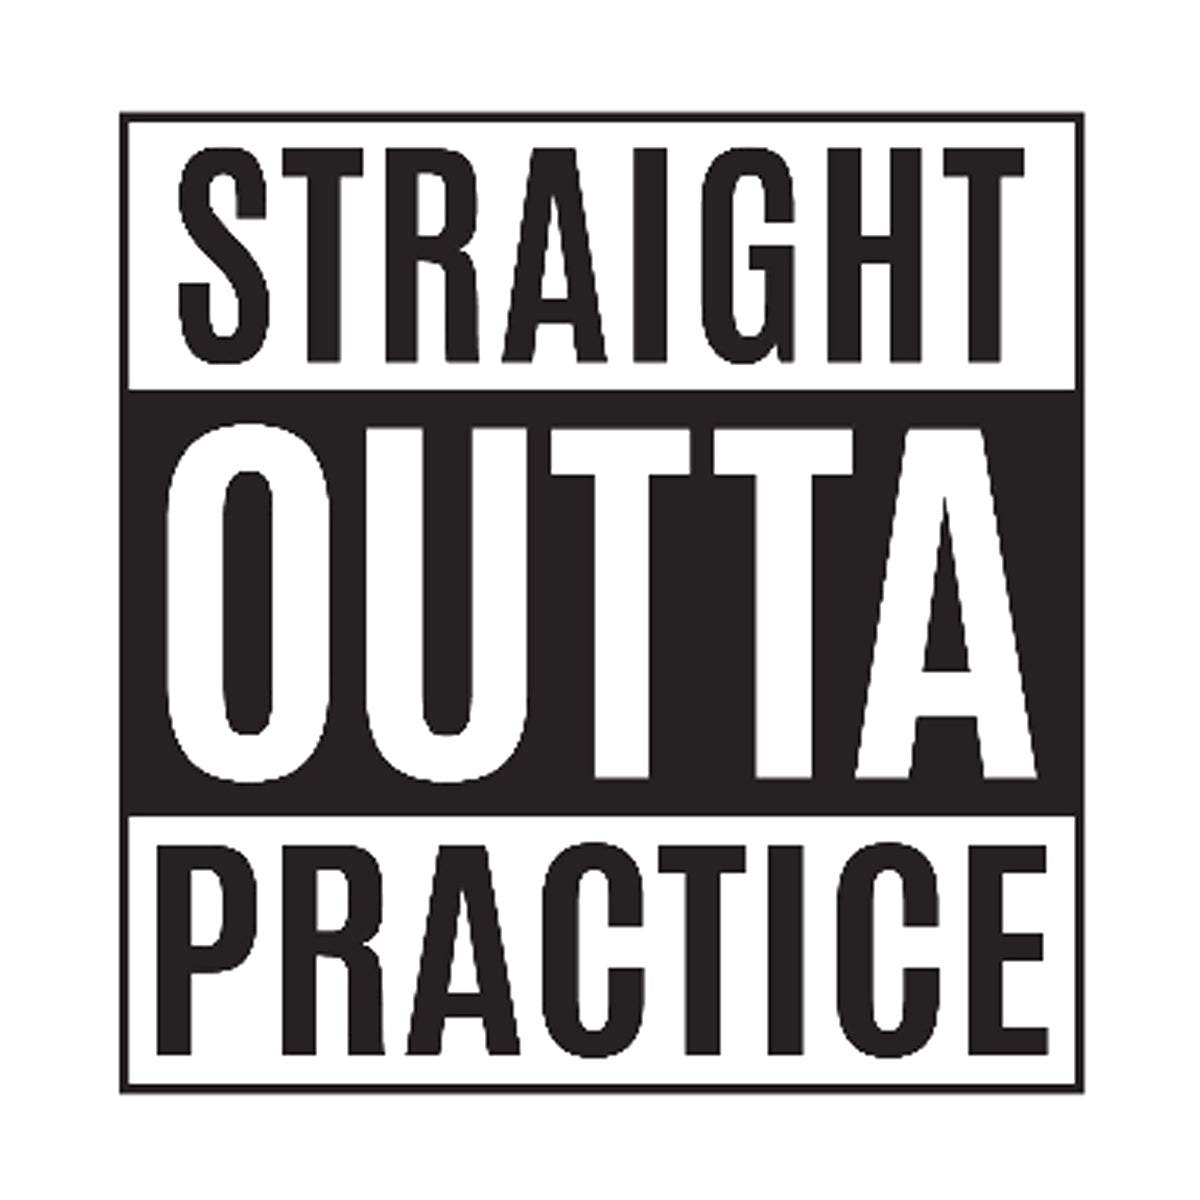 Straight Outta Practice Printed Tee Humorous Shirt 411 